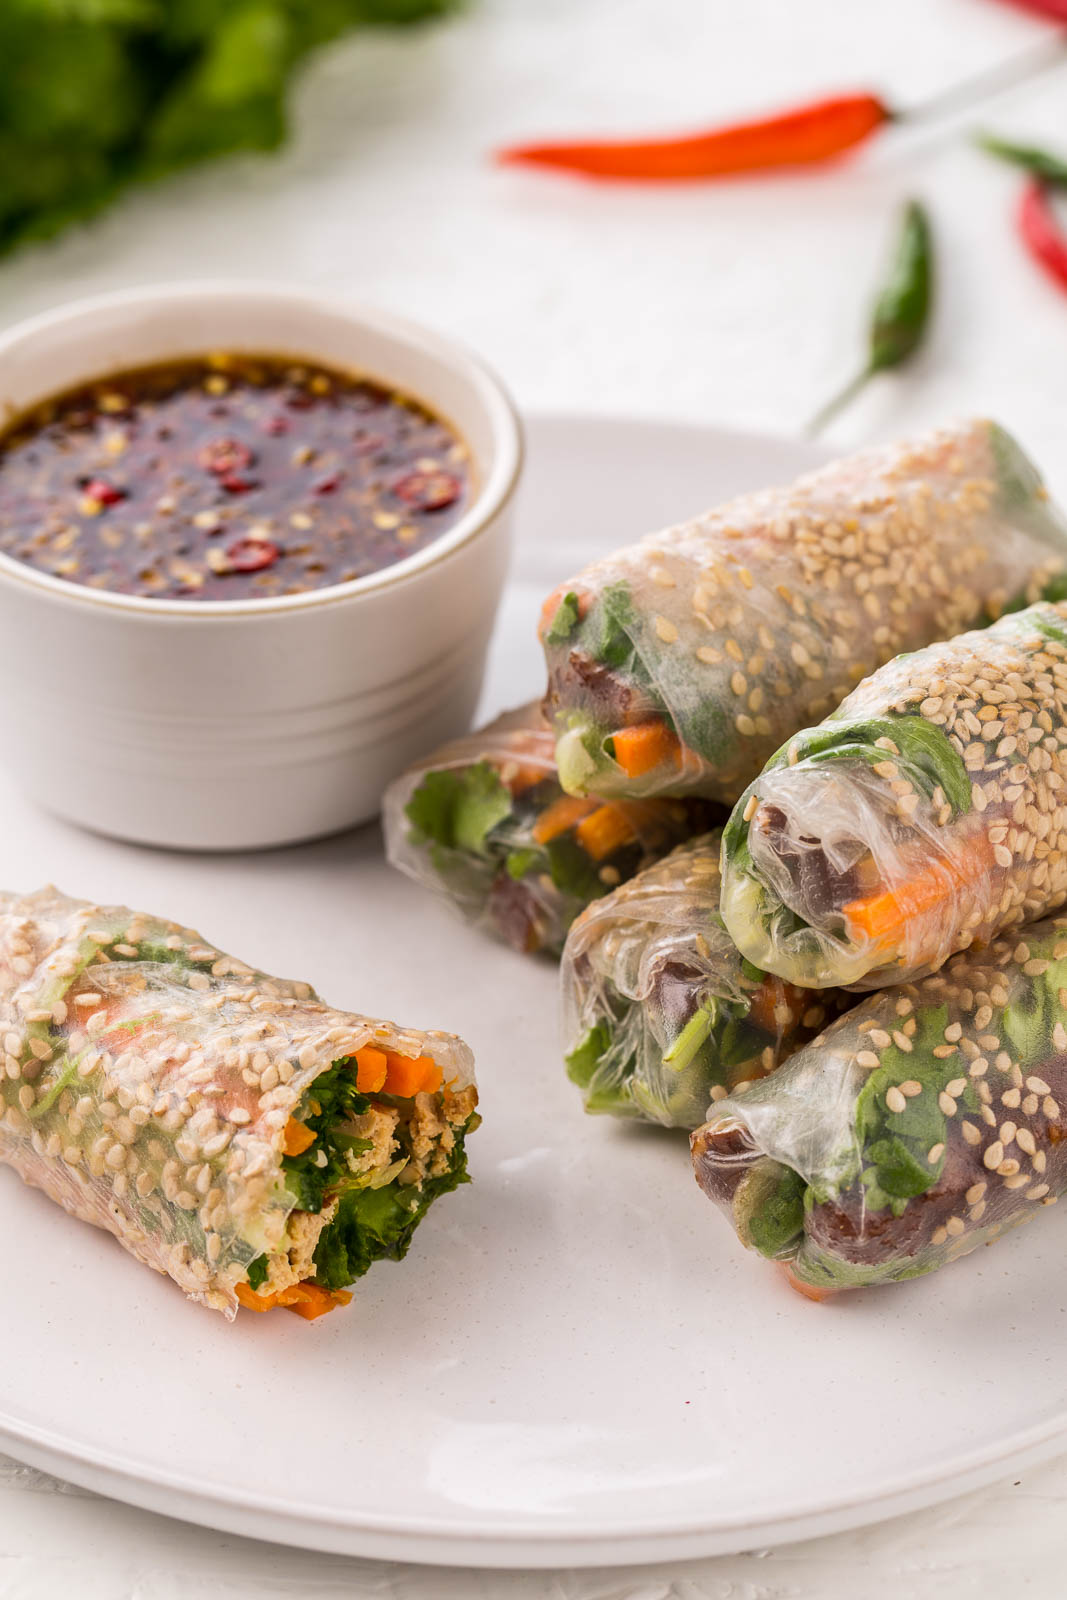 Vietnamese spring rolls with a vegetarian twist, featuring smoked tofu to make delightfully aromatic, crispy, crunchy tofu summer rolls which are vegetarian and vegan. You can make these in the kitchen to wow your guests or build them at the table so everyone can get their hands dirty.